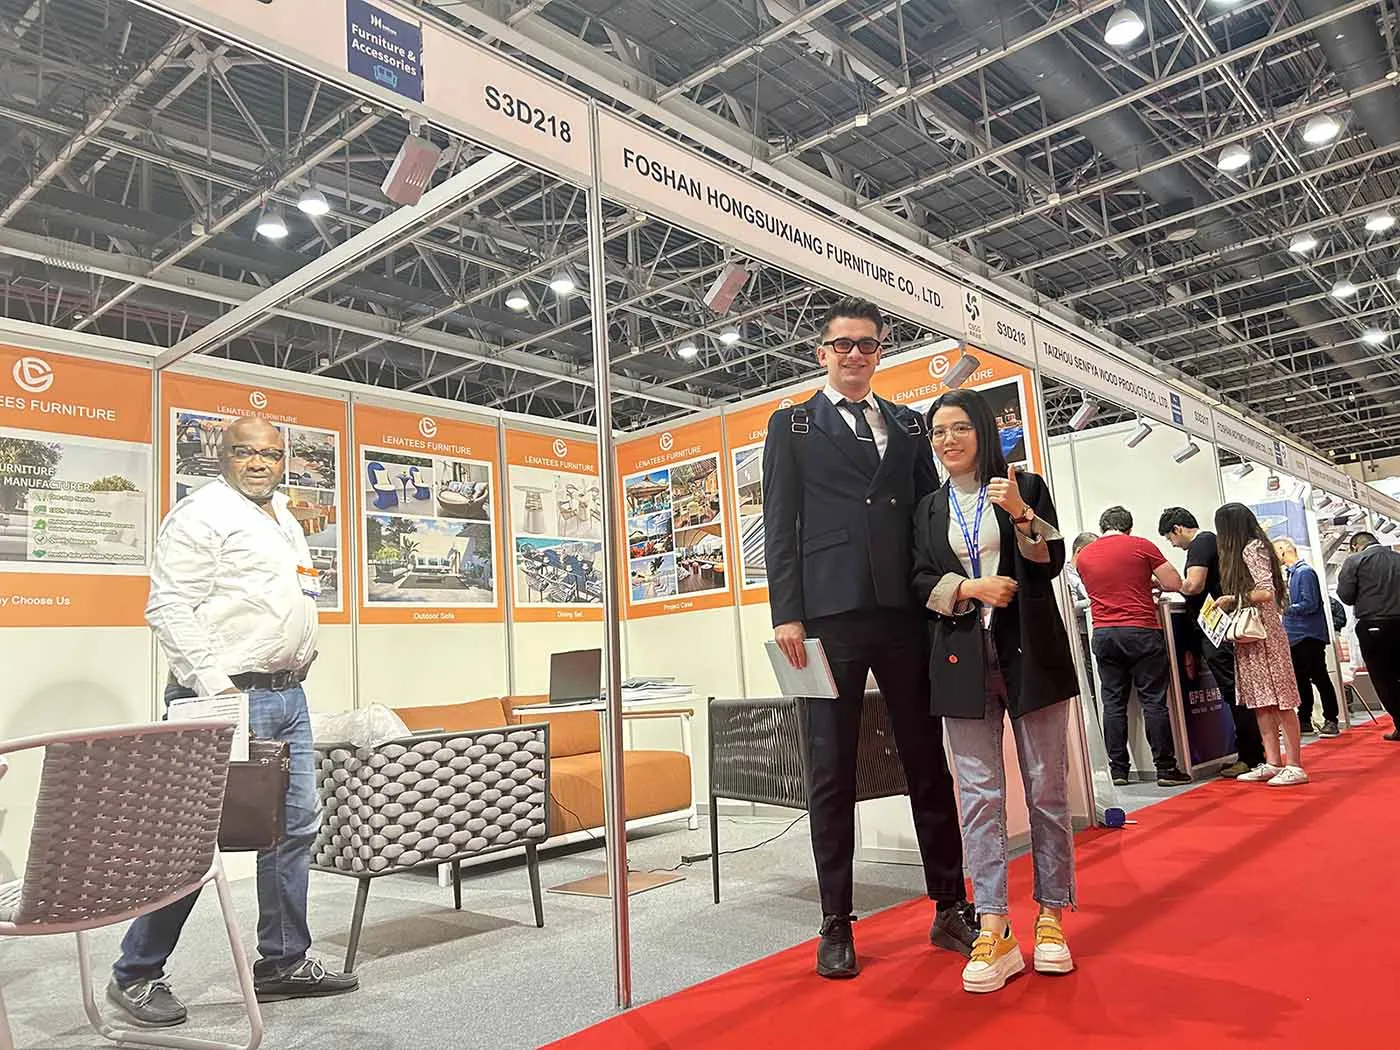 Dear furniture enthusiasts, the Dubai Furniture Exhibition has opened, and Hongsuixiang Furniture is honored to participate, presenting stunning new home products together!